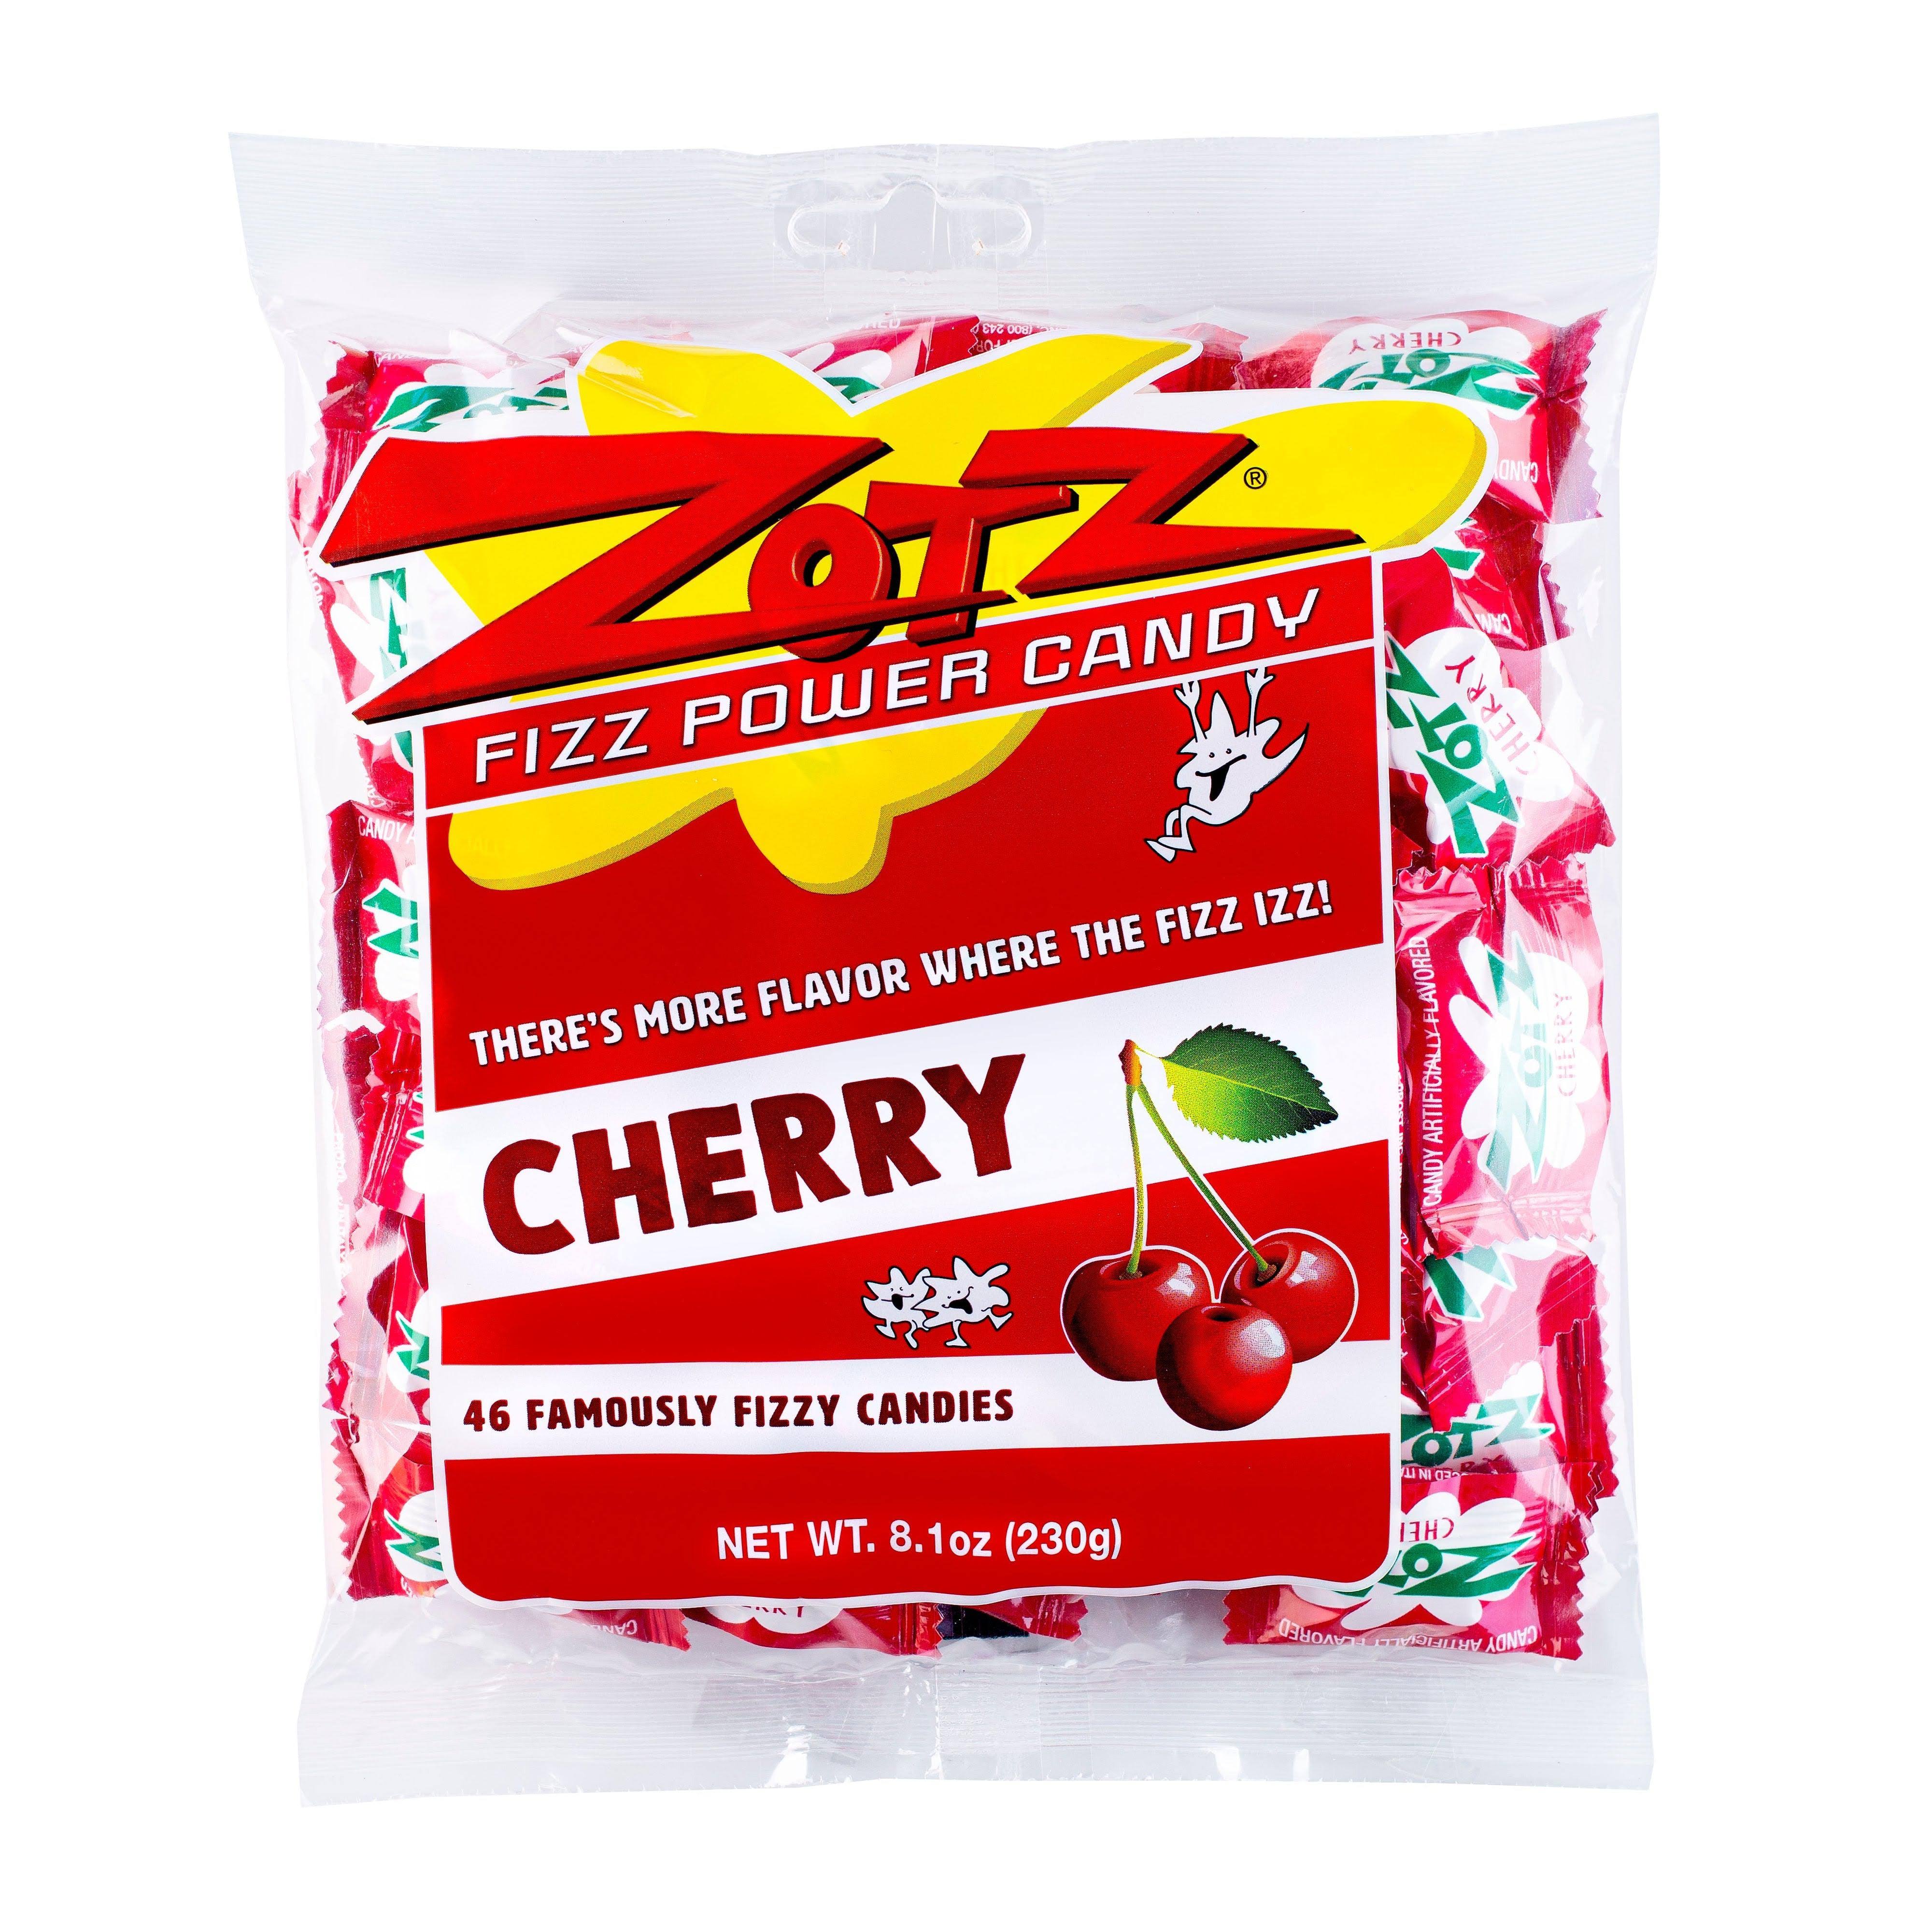 Zotz Fizz Power Candy Cherry - Fruit Flavored Hard Candy with a Fizzy Center | 230g Bag, Single Pack | Gluten-Free